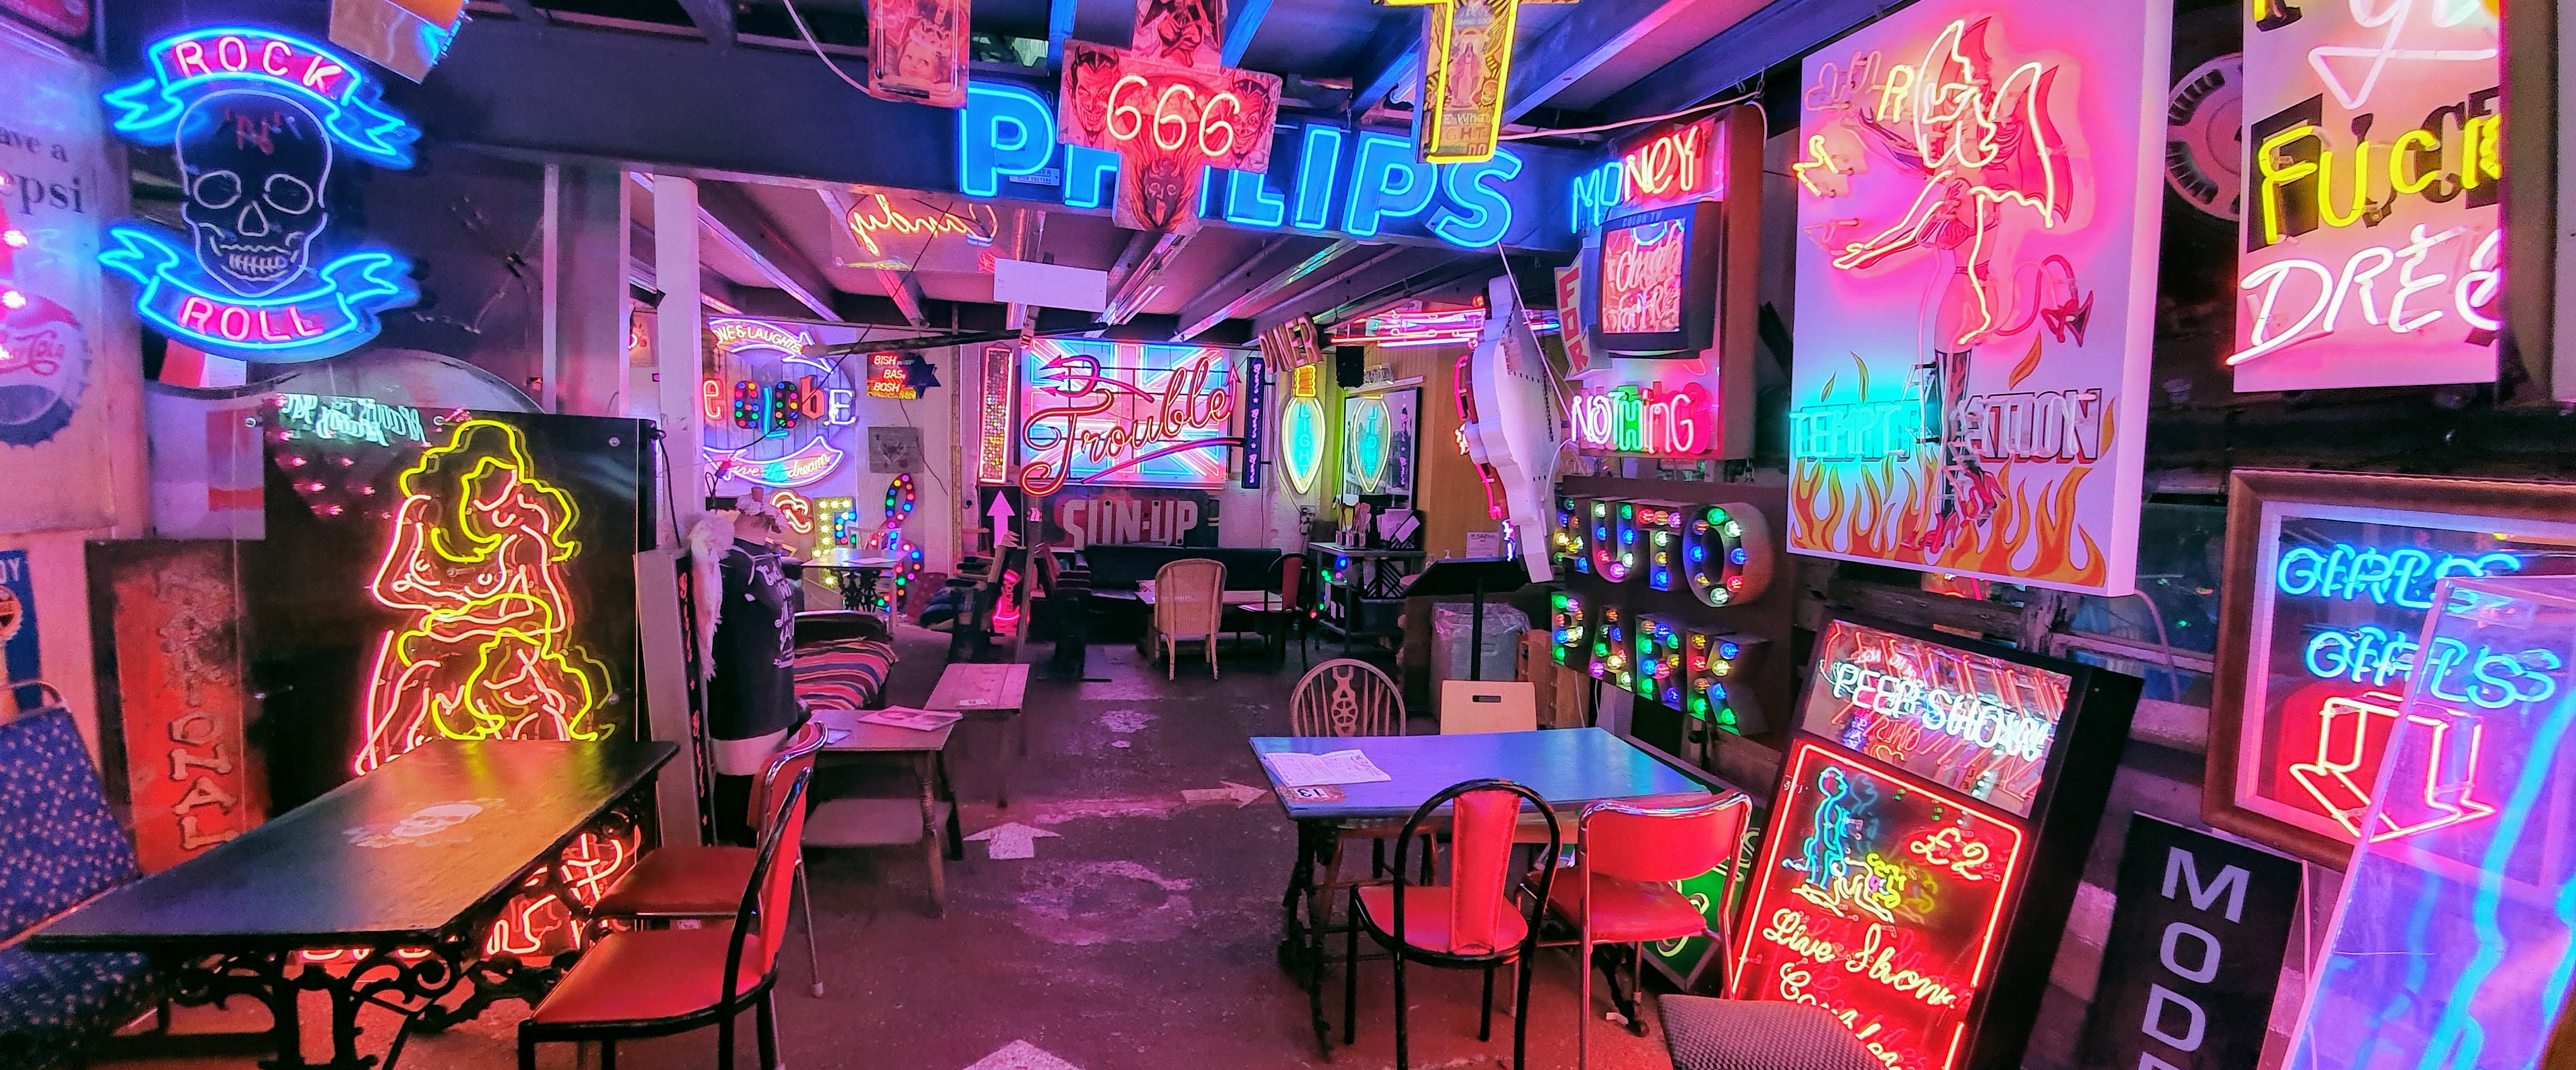 Interior of The Rolling Scones Café at God's Own Junkyard, Walthamstow, London